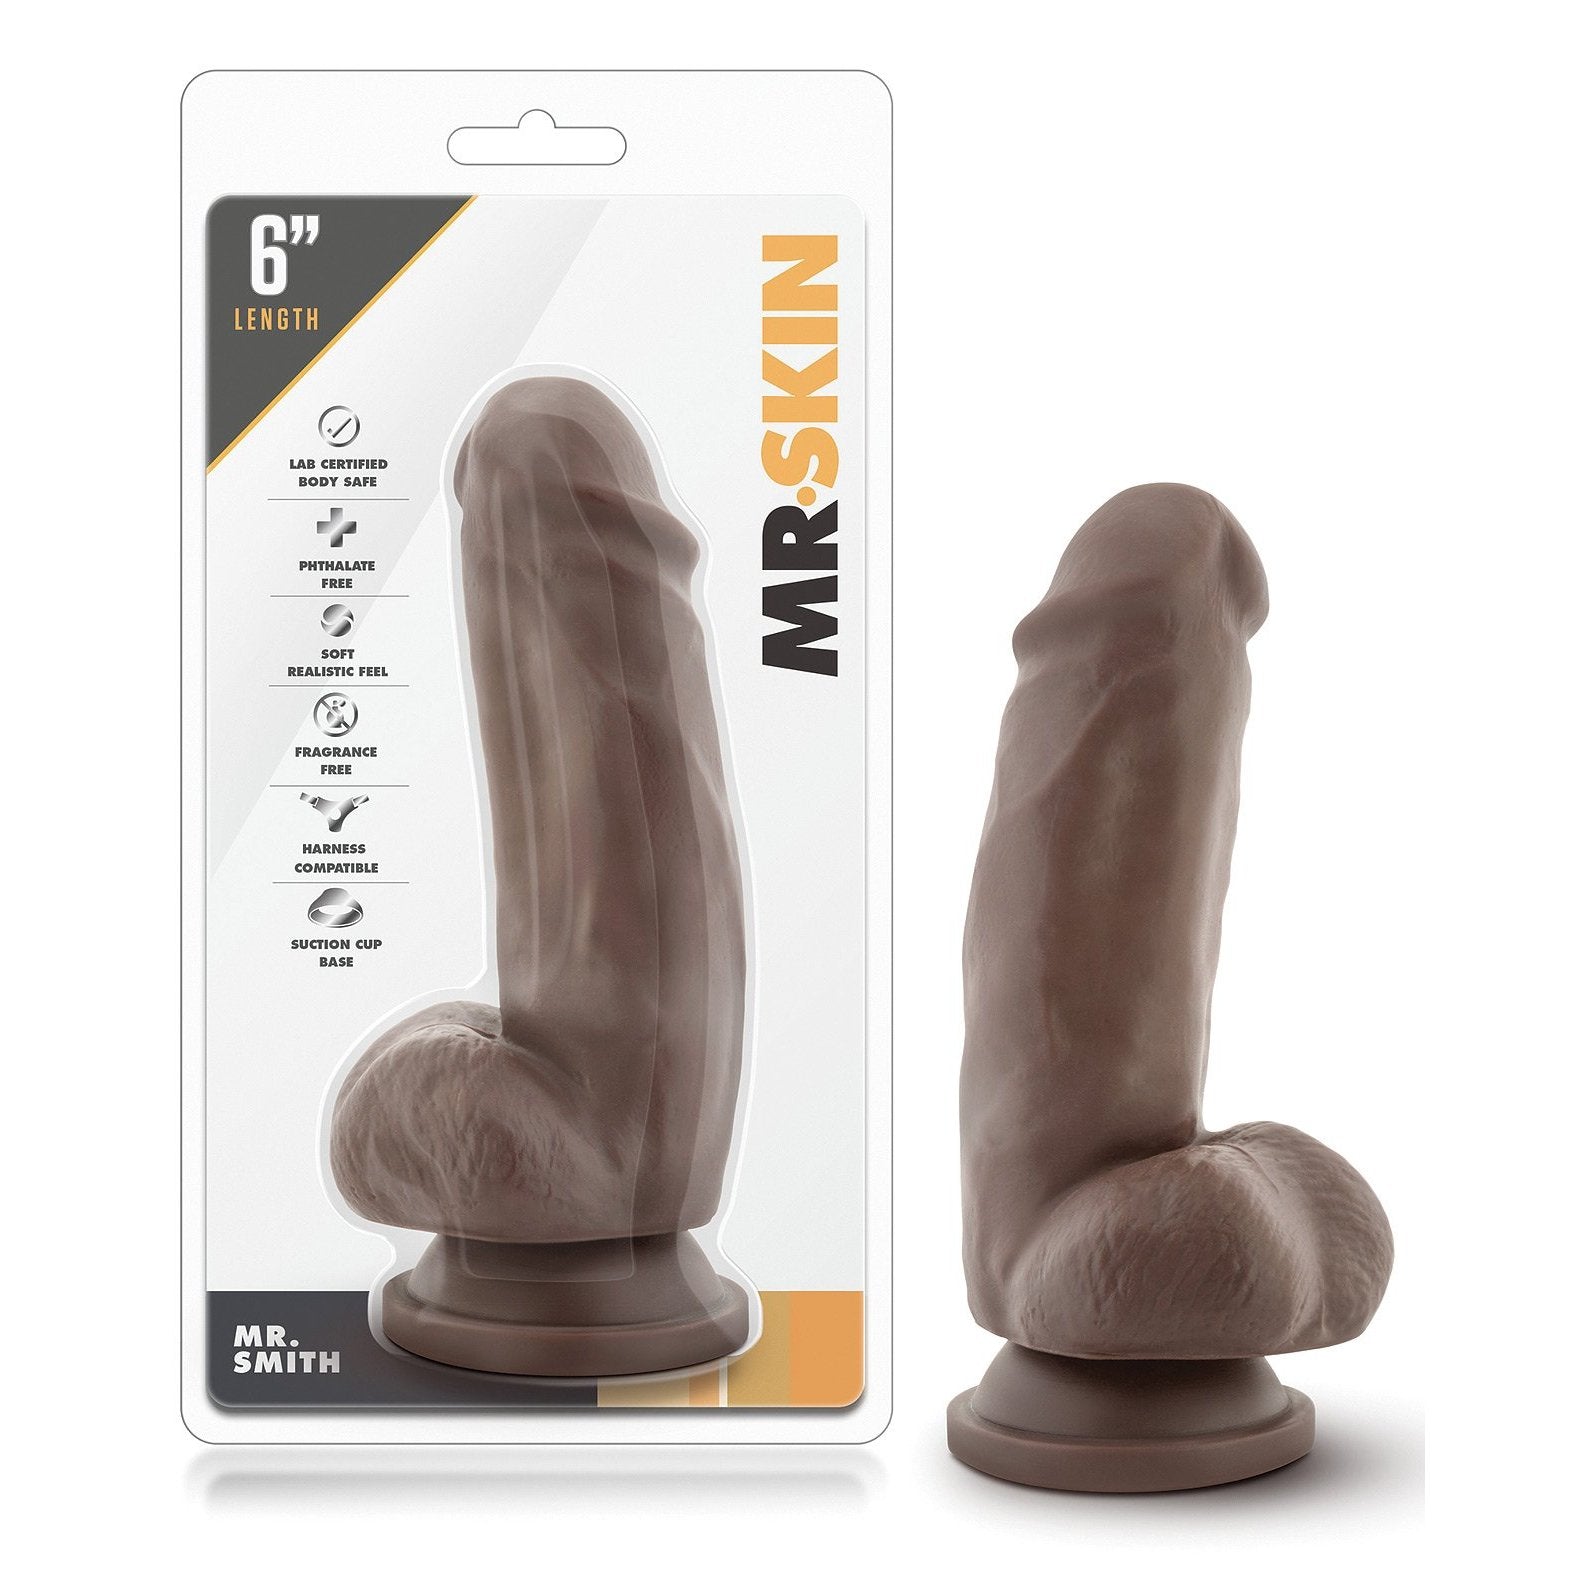 Blush Dr. Skin Mr. Skin 6" Dildo with Suction Cup - Mr. Smith